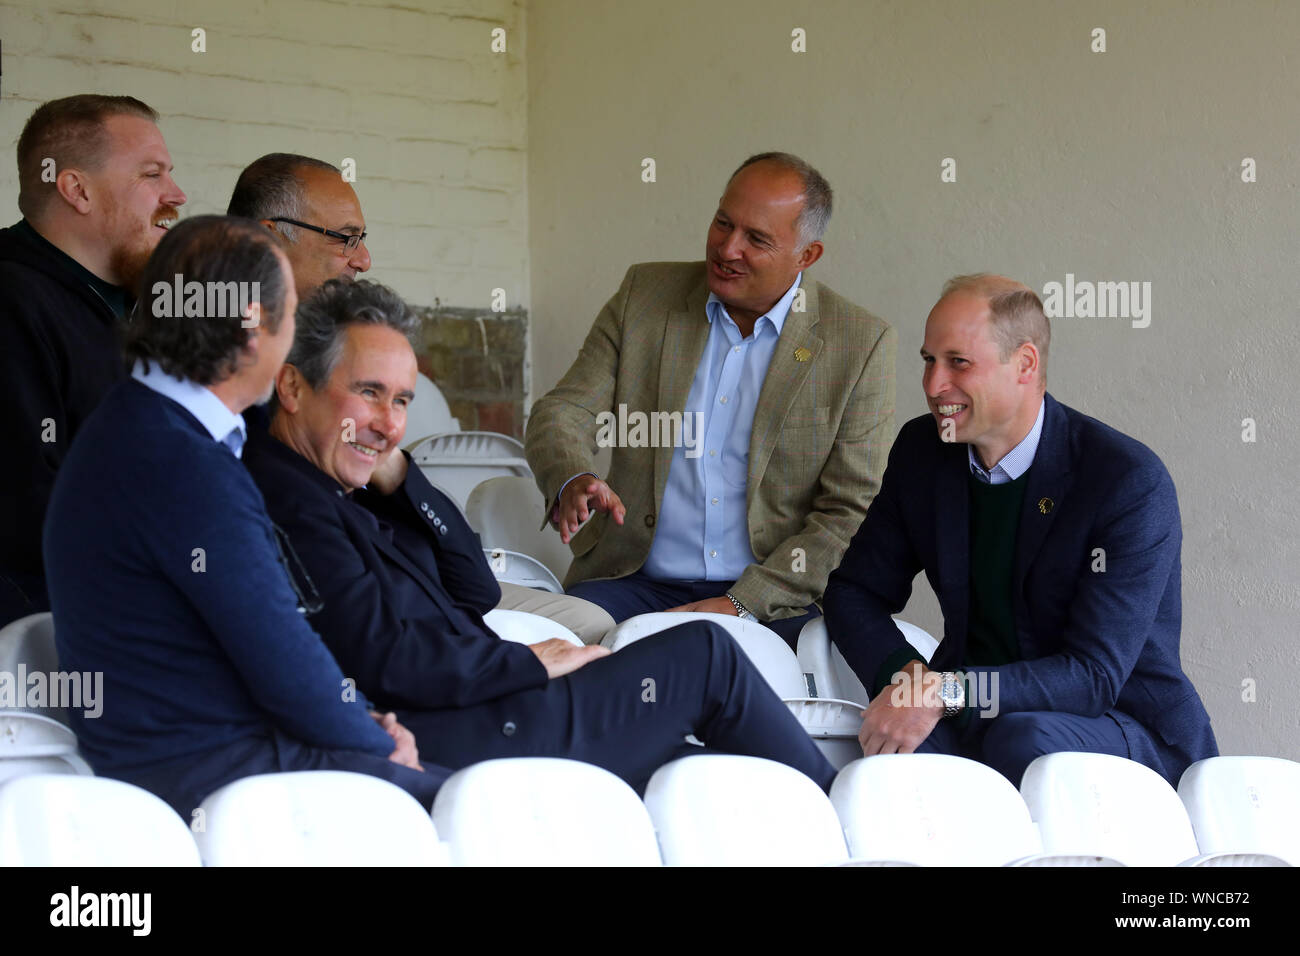 Duke of Cambridge and Rob Morris, Co-Owner of Silver Jubilee Park and Hon Vice President of Hendon FC and Edware Town FC speak to club officials, during his visit to Hendon FC in London to learn more about the club's mental health outreach initiatives. PA Photo. Picture date: Friday September 6, 2019. See PA story ROYAL Cambridge. Photo credit should read: Tim Whitby/PA Wire Stock Photo